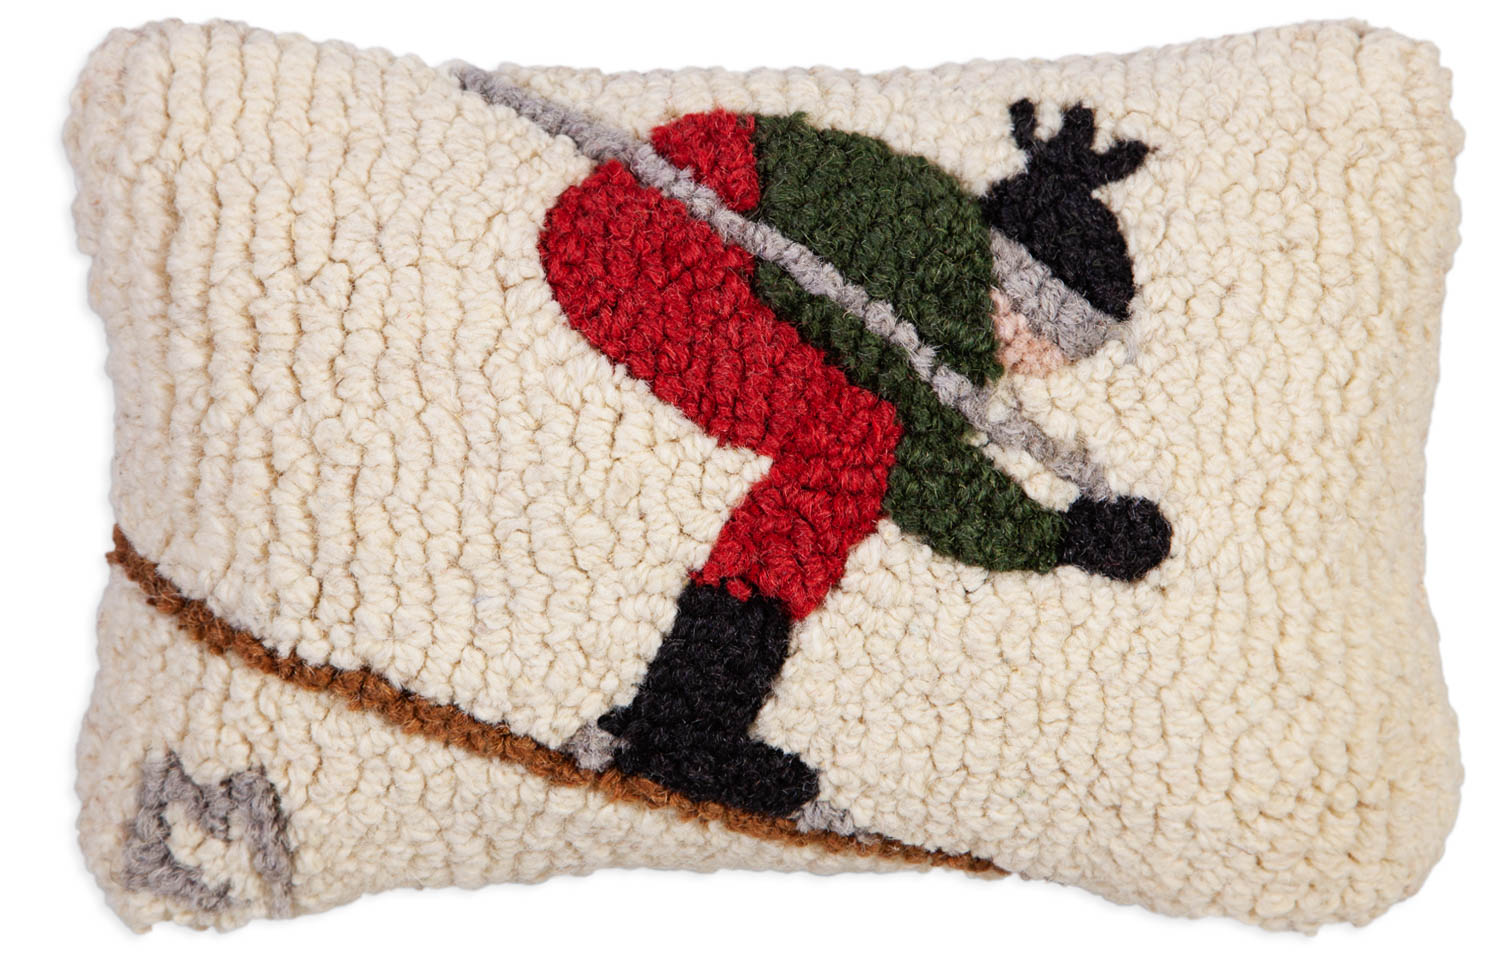 Downhill Skier Hooked Wool Pillow